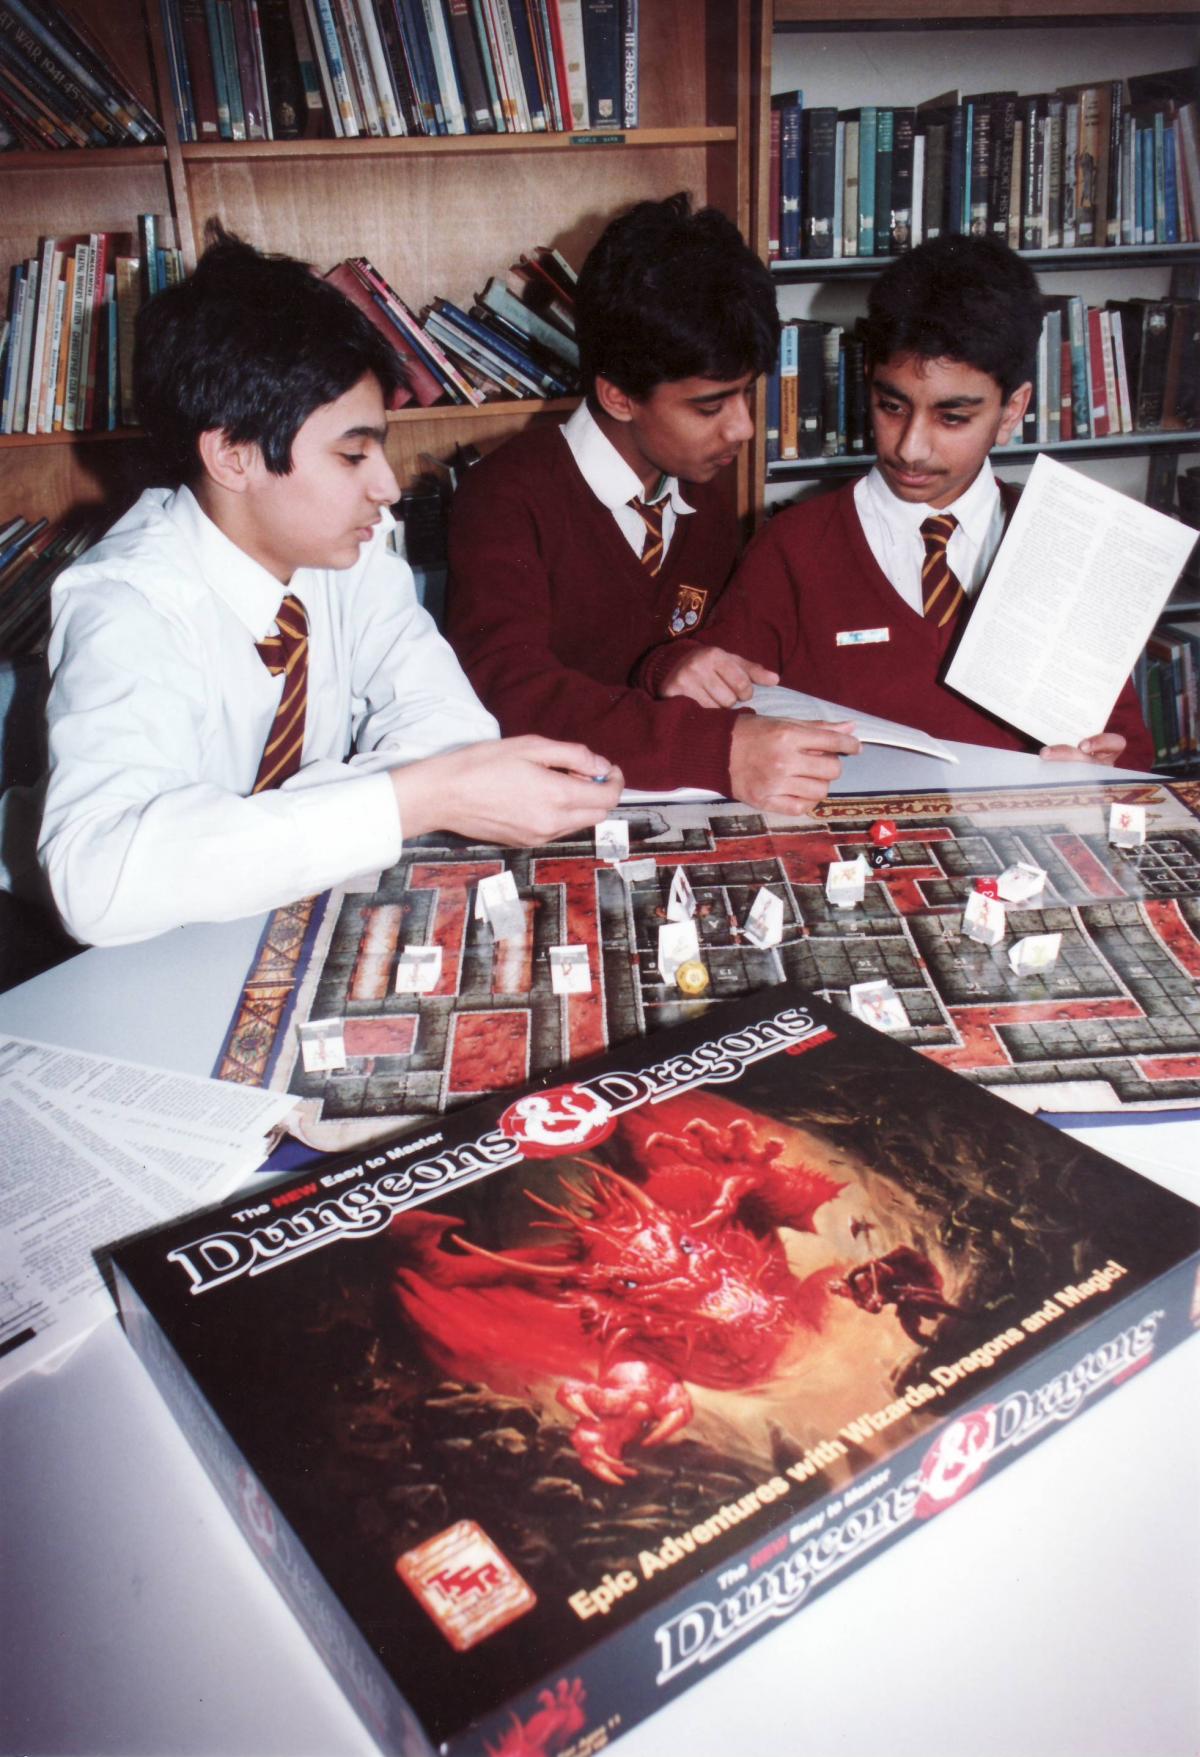 Belle Vue boys playing Dungeons and Dragons in 1994